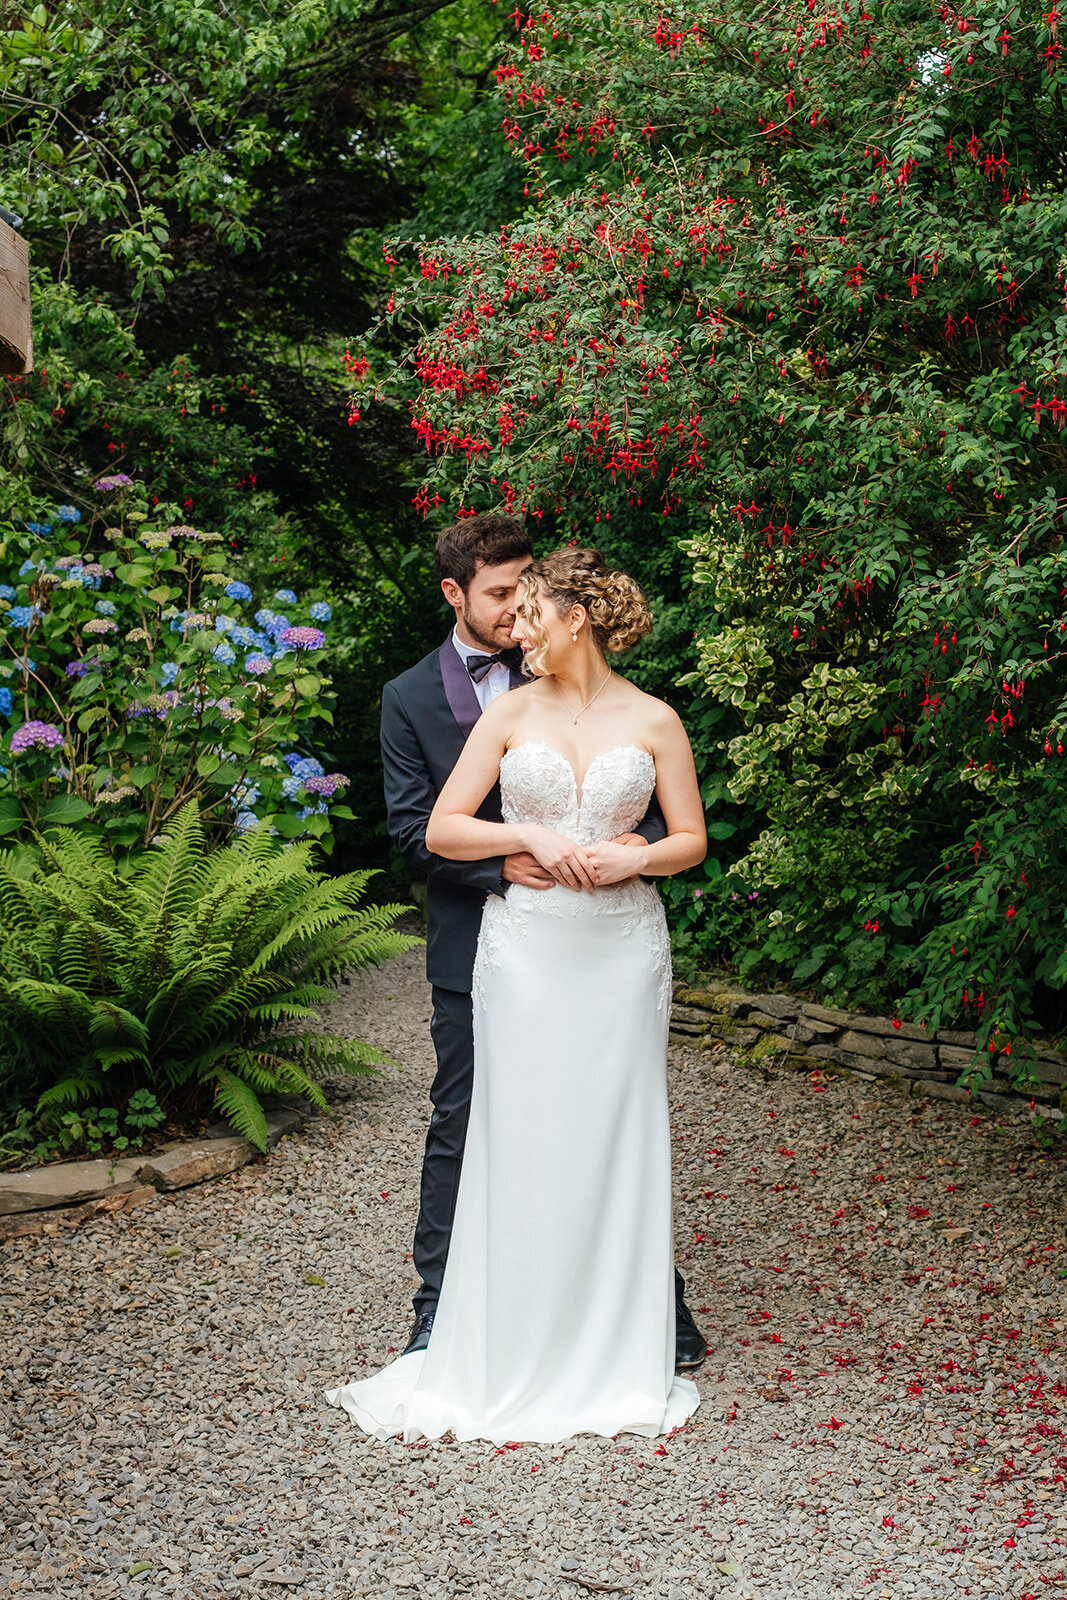 Kilminorth Cottages styled wedding shoot - Charlie Flounders Photography -0335